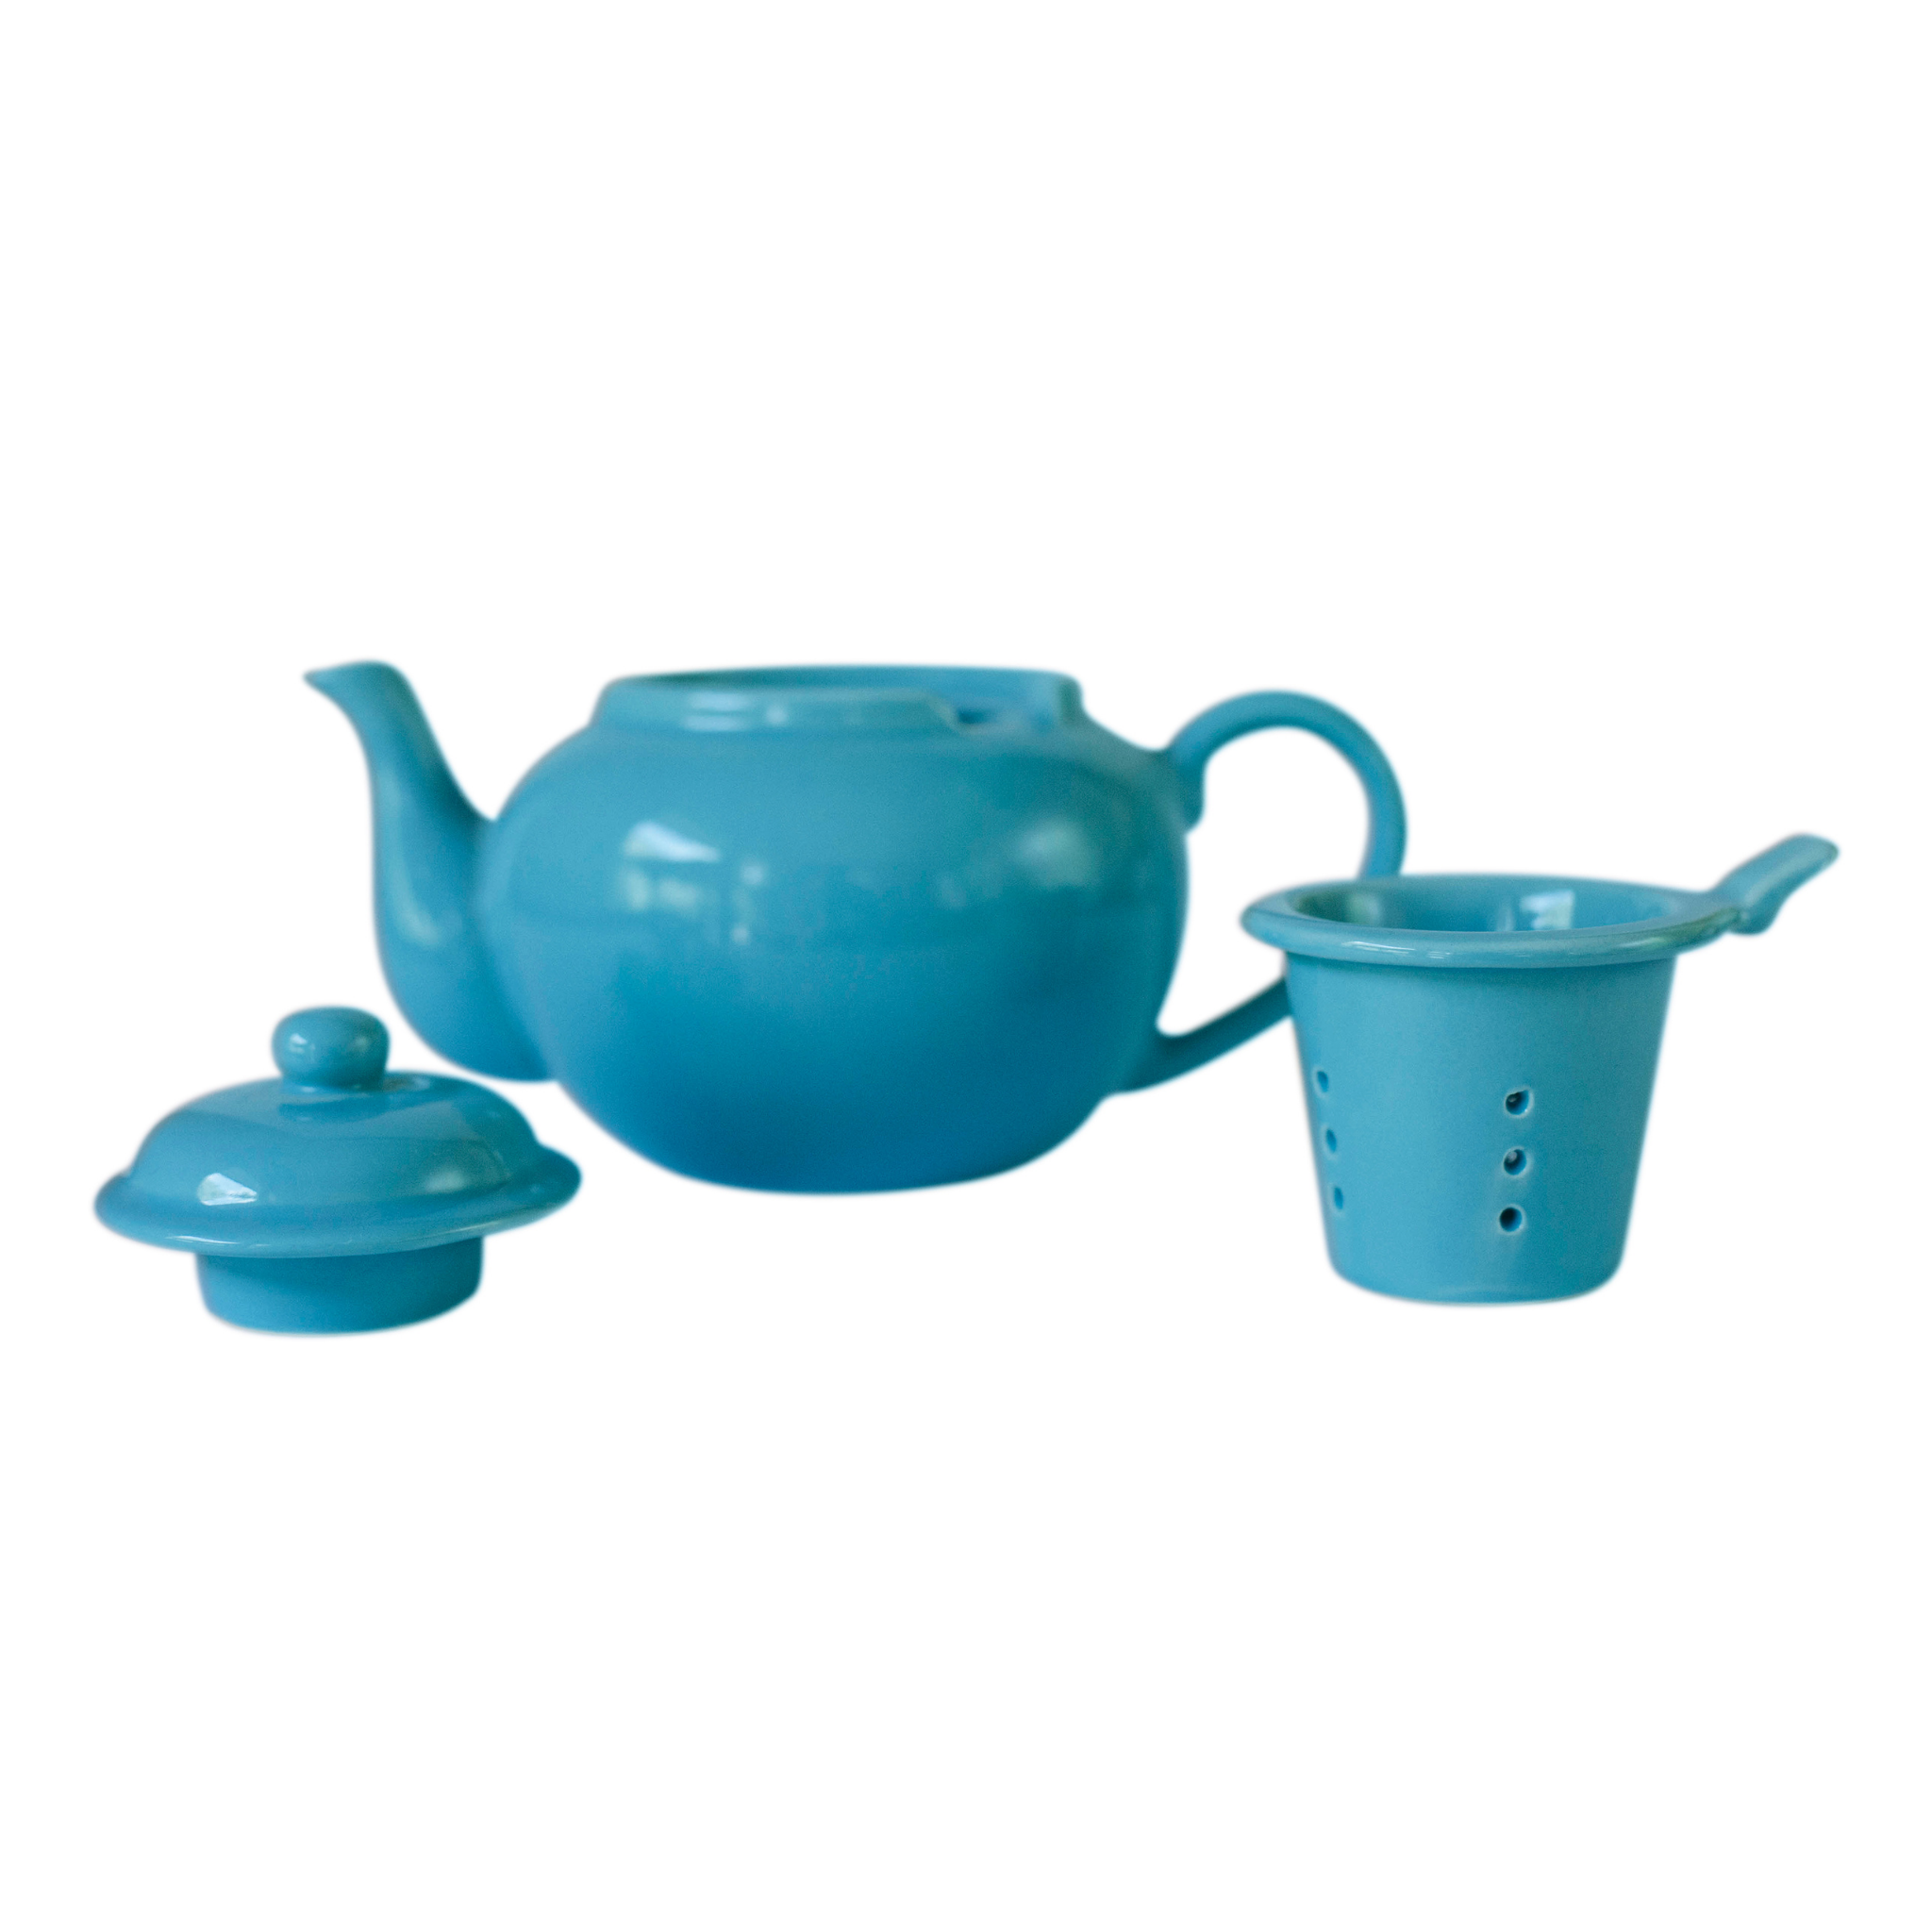 https://cdn.shopify.com/s/files/1/0324/5984/9865/products/Ceramic-Teapot-forloosetea-Bluewithstrainer_2048x.png?v=1617422638